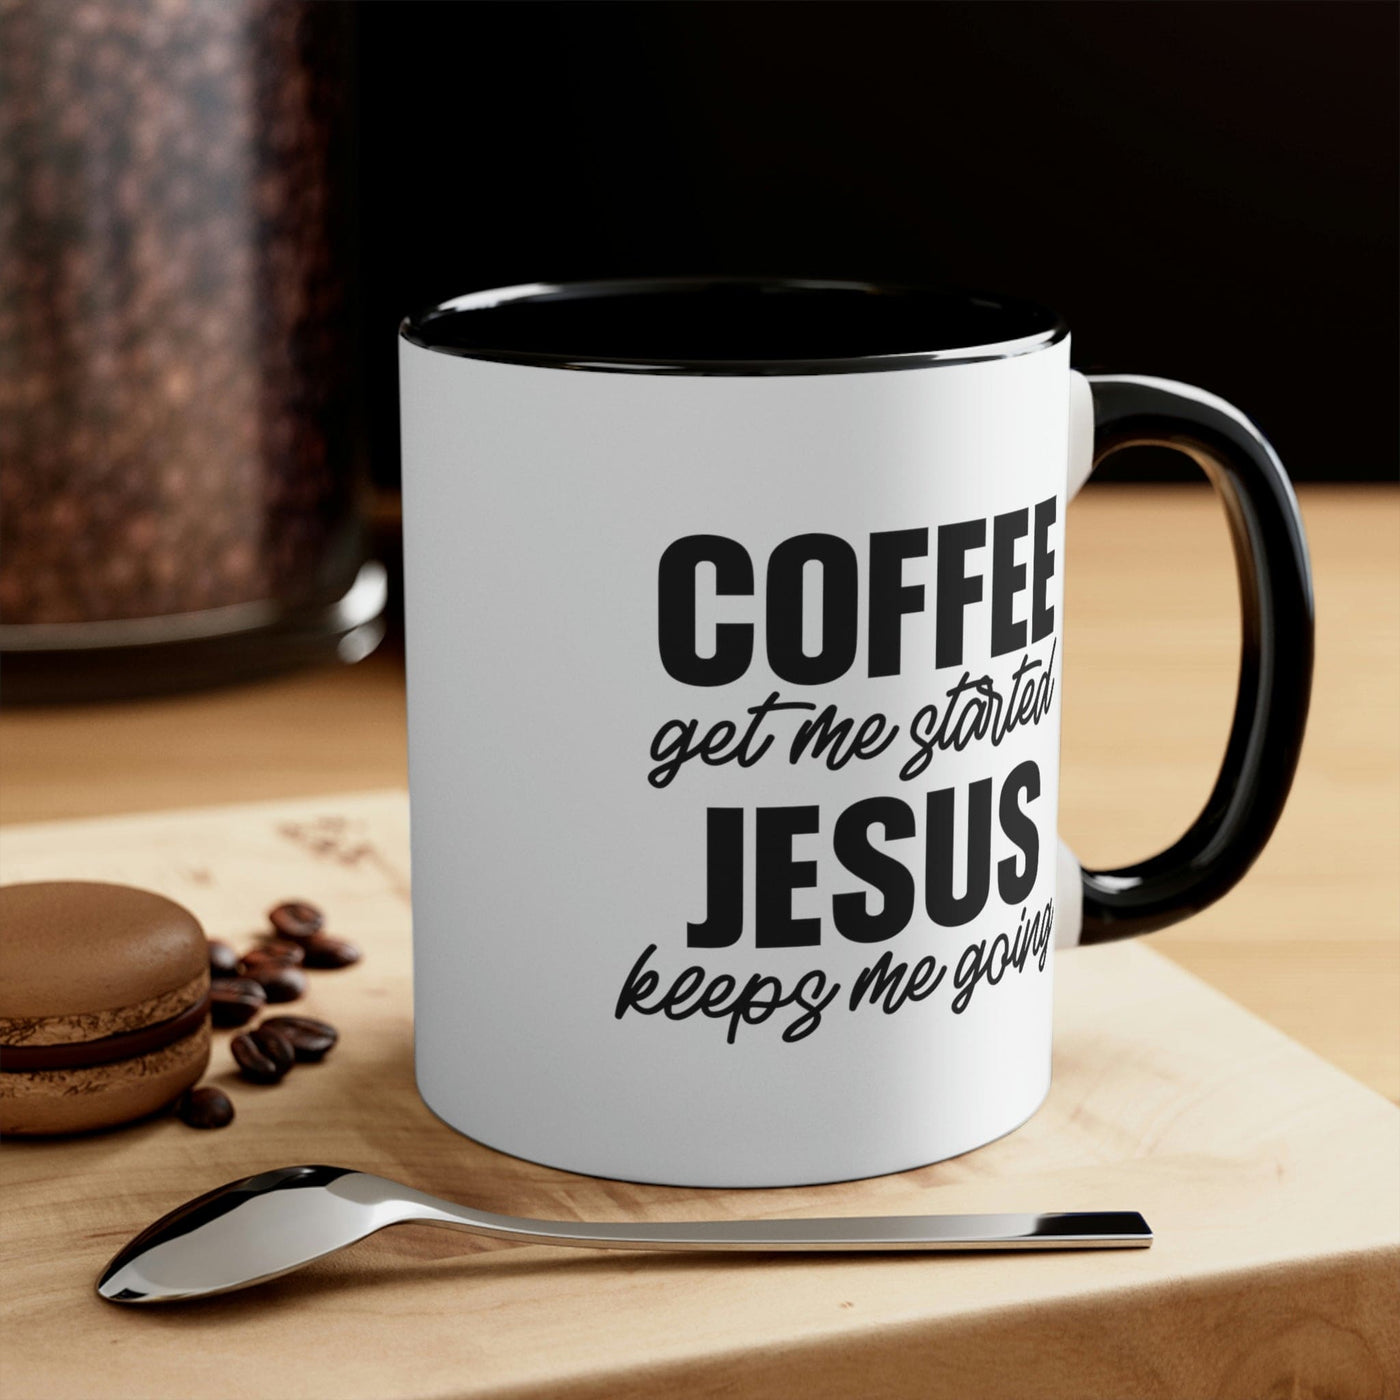 Two-tone Accent Ceramic Mug 11oz Coffee Get Me Started Jesus Keeps Me Going